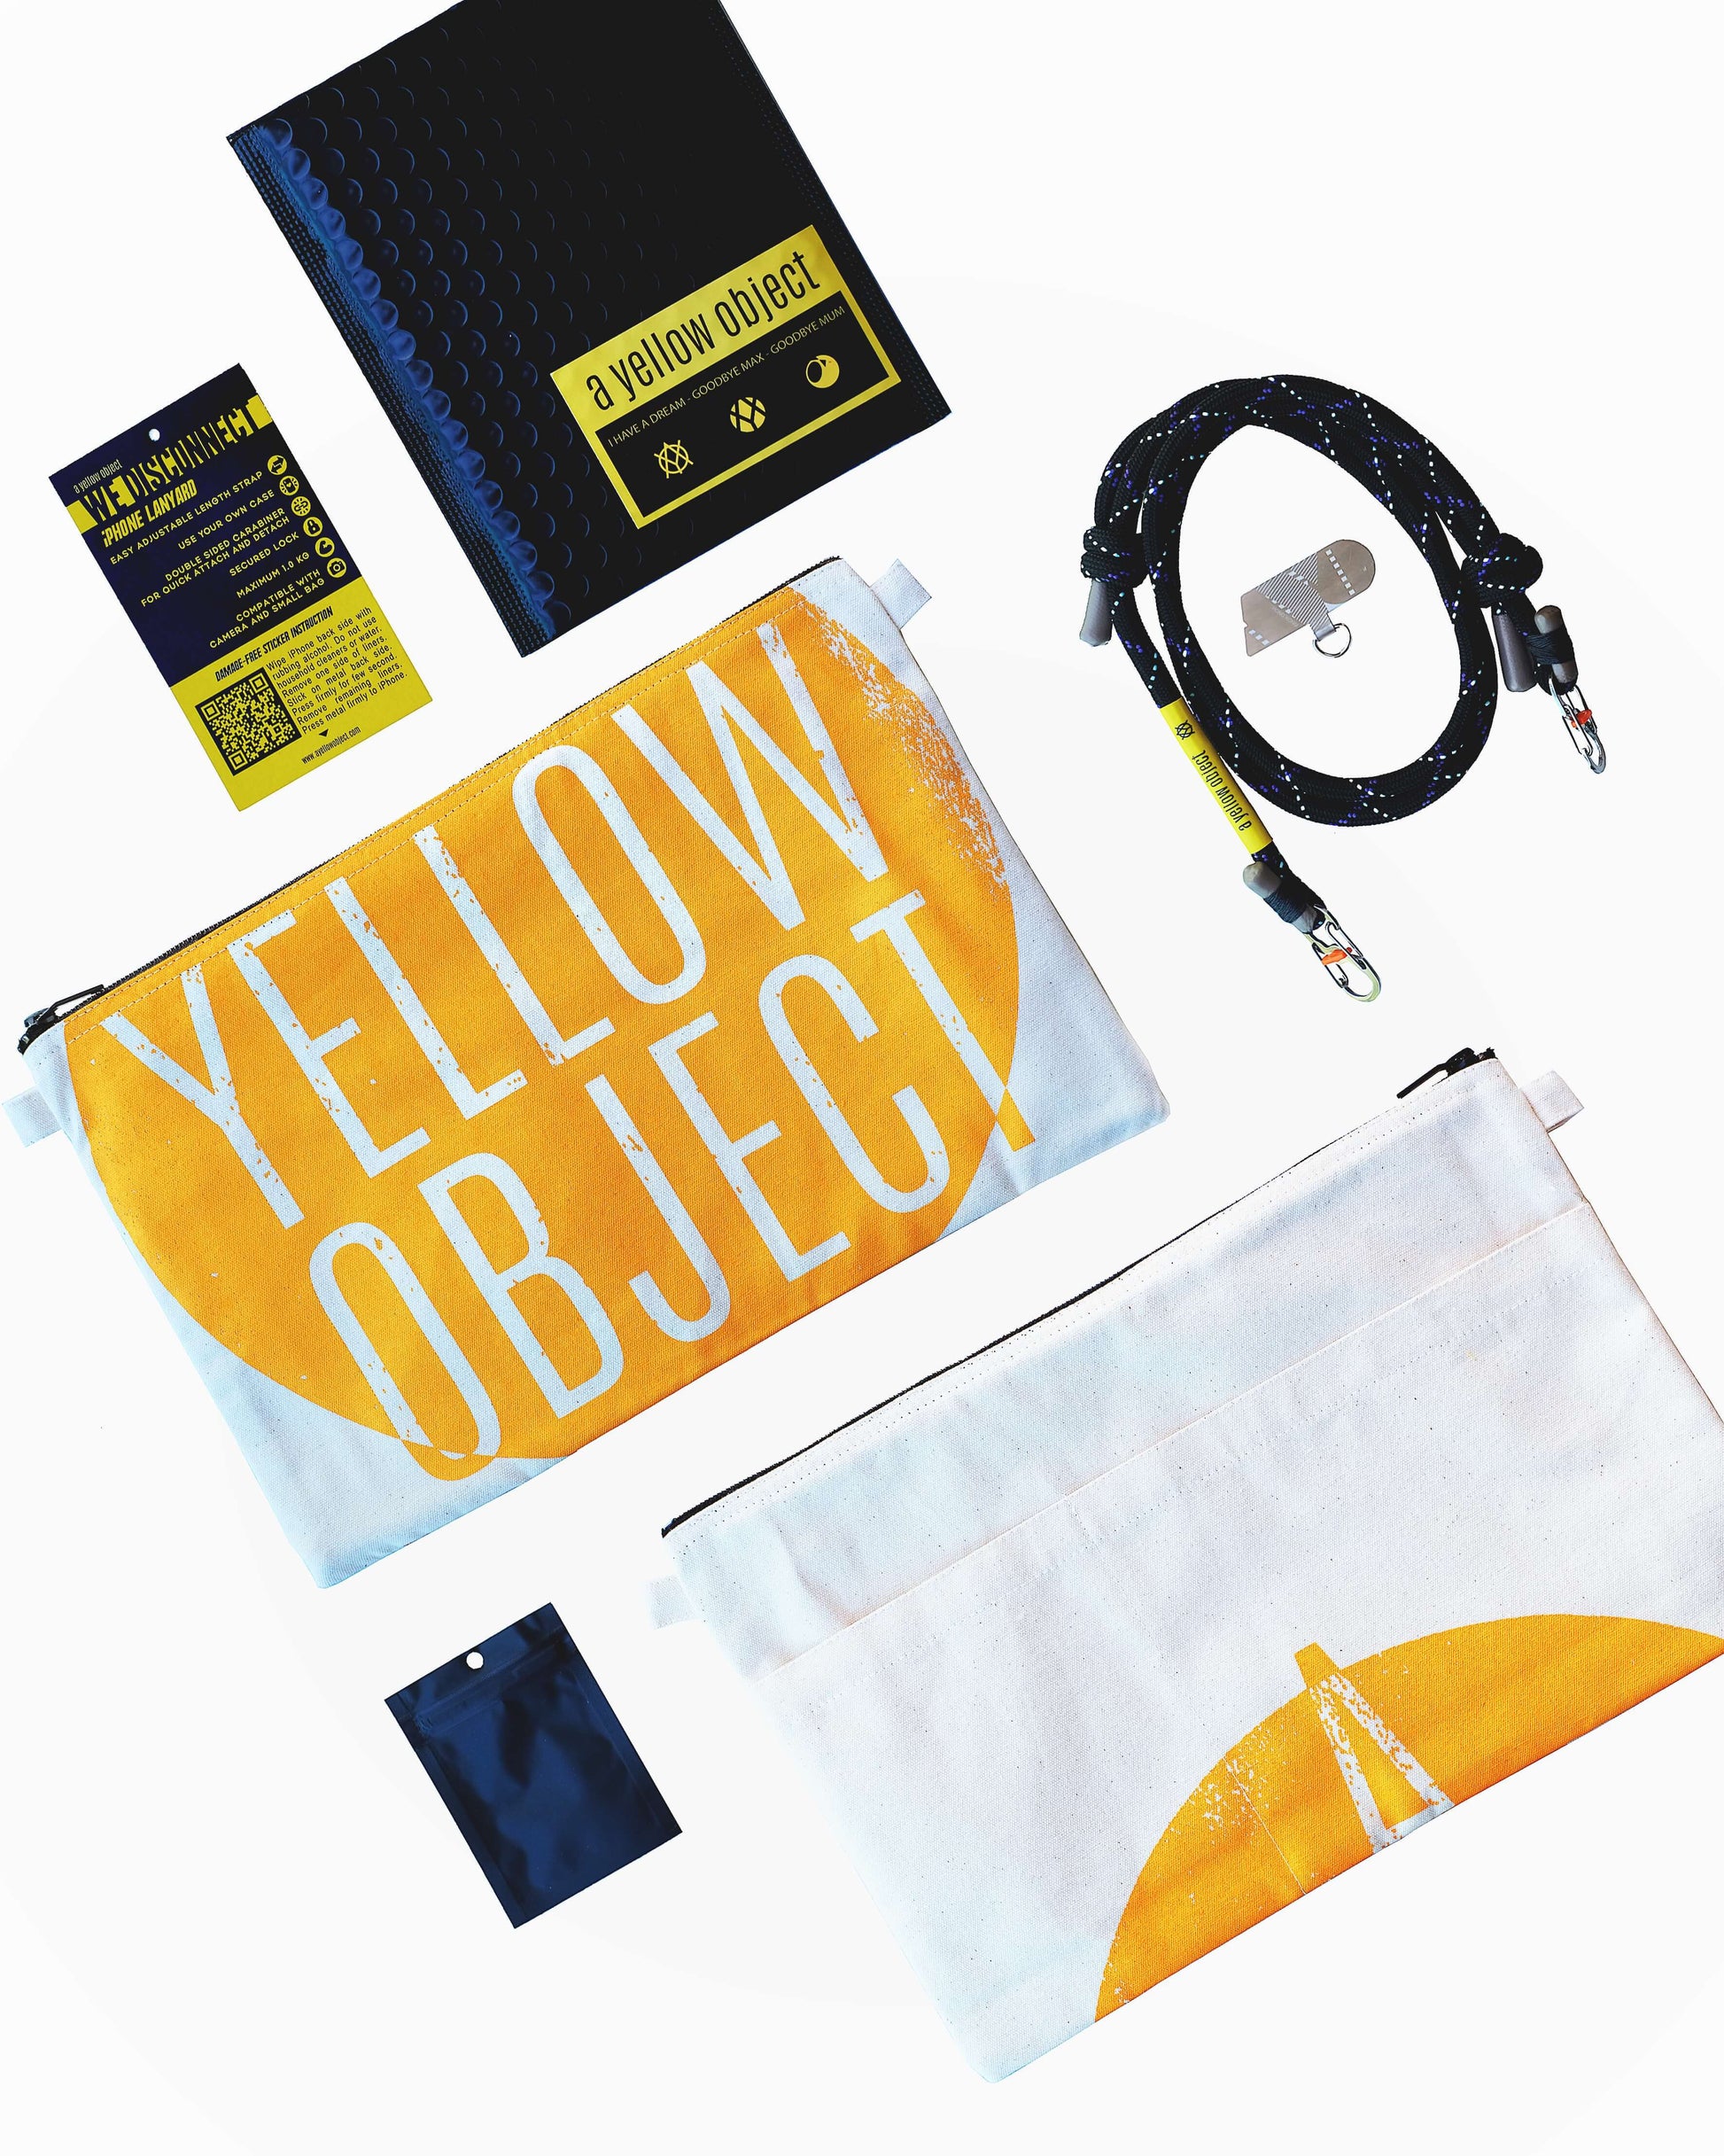 We Disconnect iPhone Lanyard (Black) - A Yellow Object